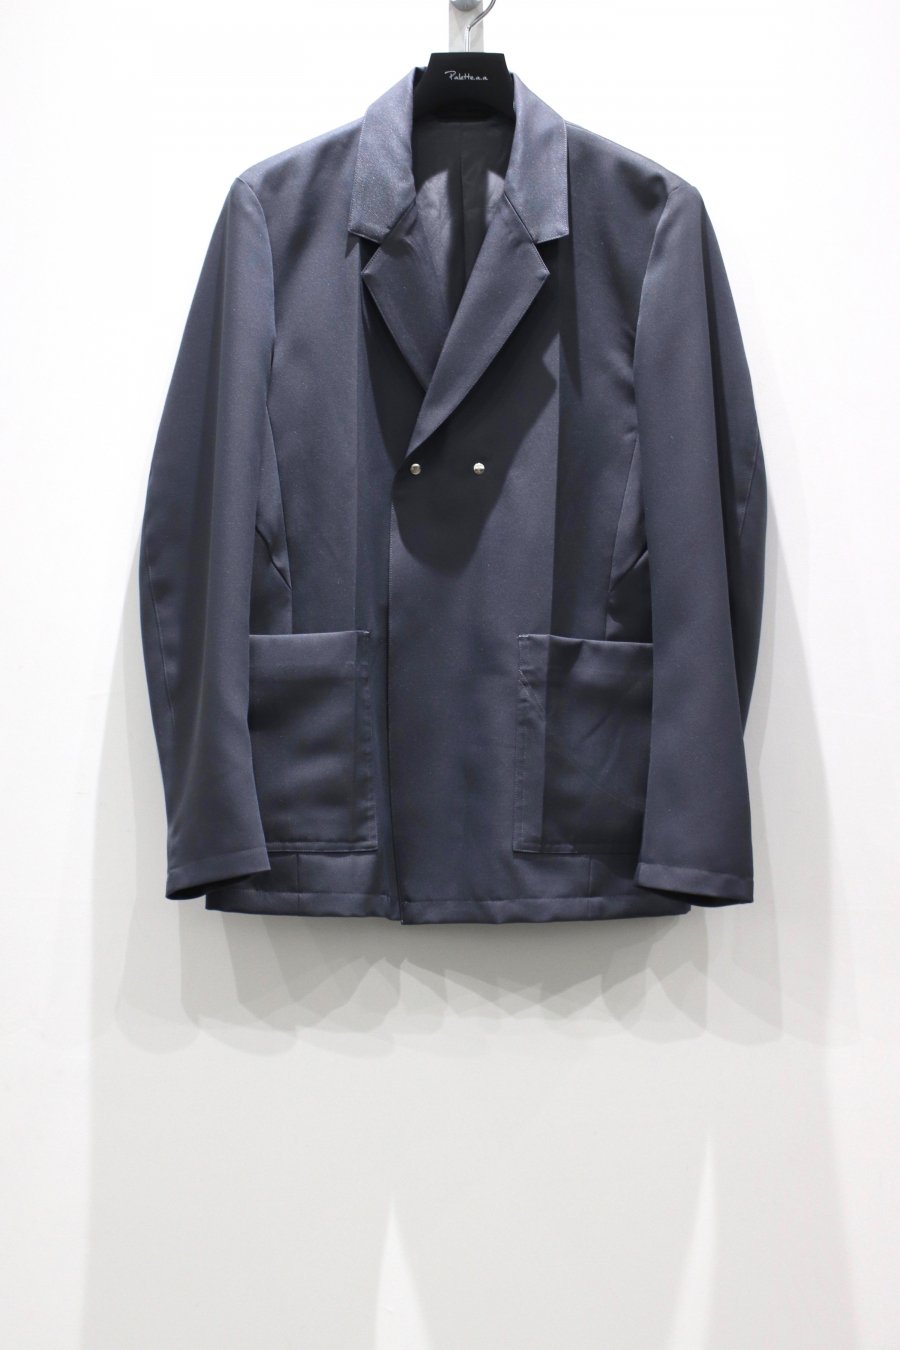 NULABEL  WORK BLAZER<img class='new_mark_img2' src='https://img.shop-pro.jp/img/new/icons15.gif' style='border:none;display:inline;margin:0px;padding:0px;width:auto;' />